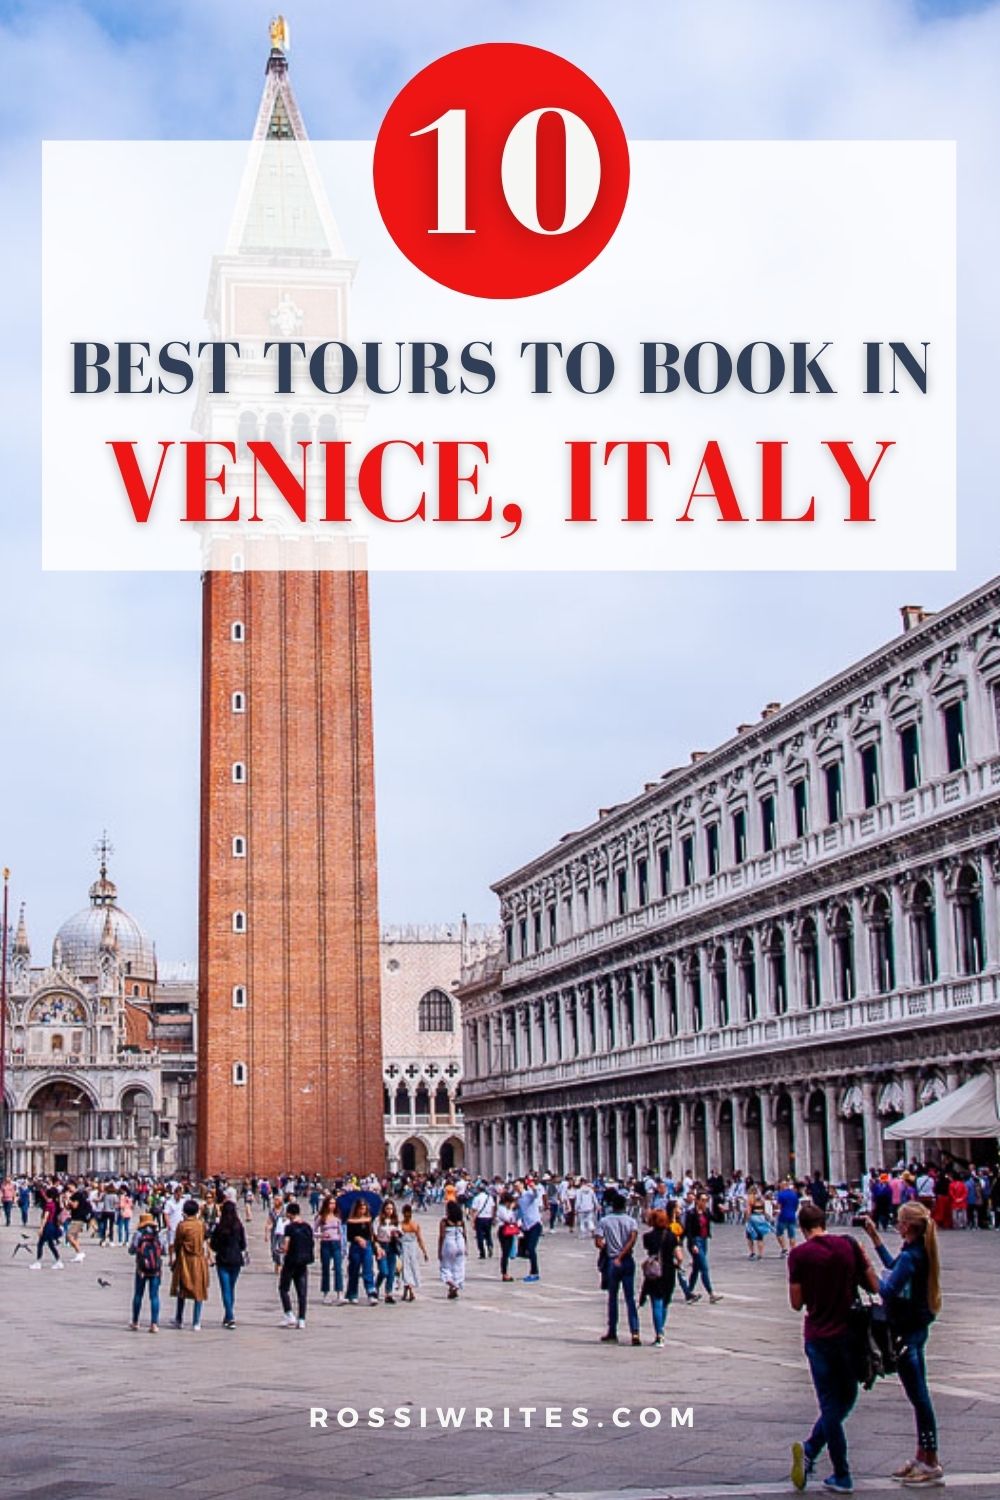 10 Best Tours in Venice, Italy to Book for Your Visit